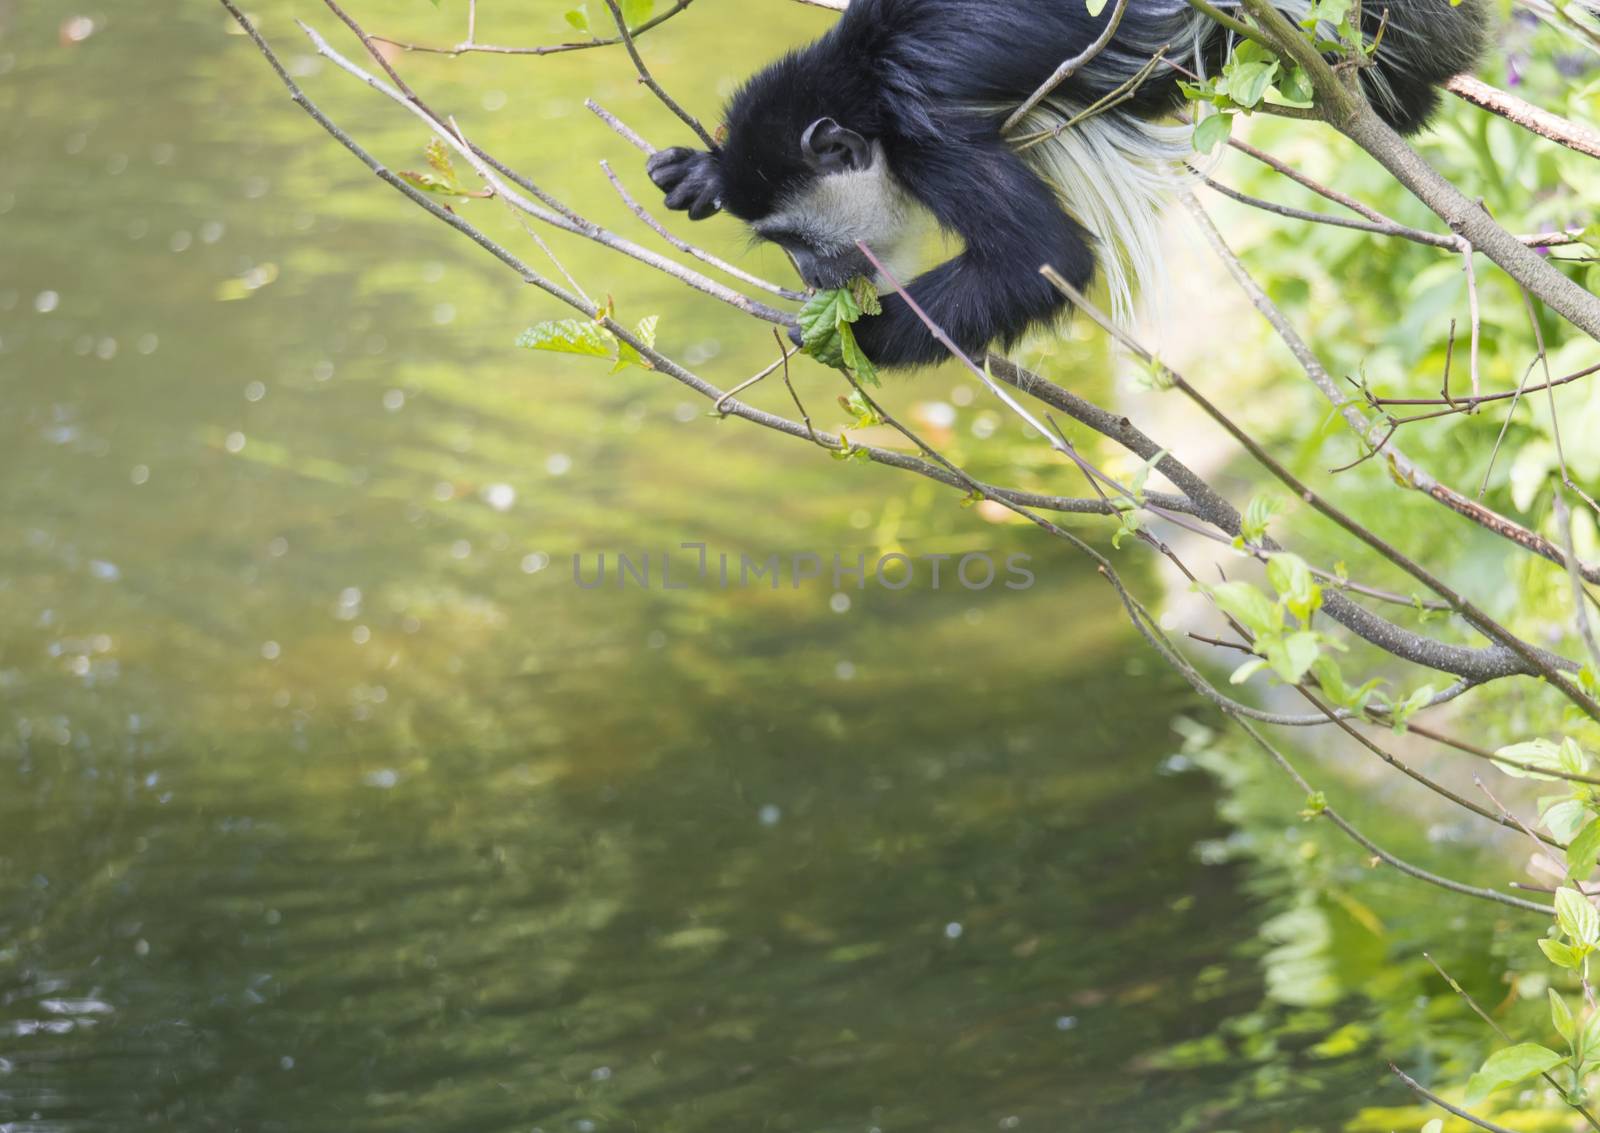 young baby Mantled guereza monkey also named Colobus guereza eating tree leaves, climbing tree branch over the water, natural sunlight, copy space by Henkeova